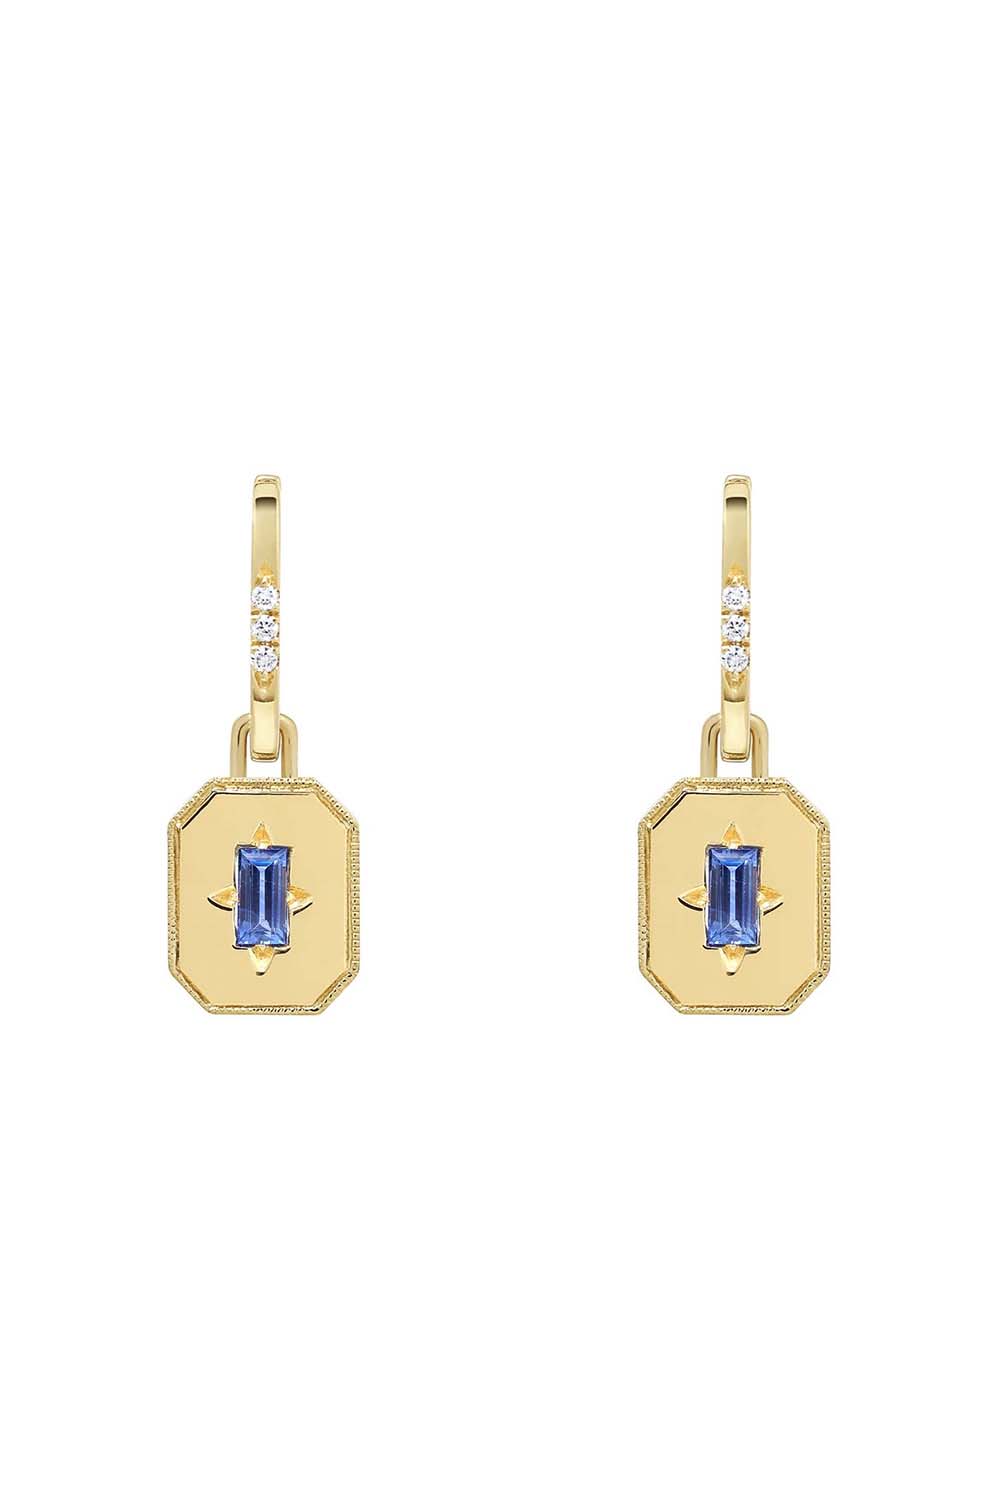 STATE PROPERTY-Blue Sapphire Spade Pendant Drop Earrings-YELLOW GOLD